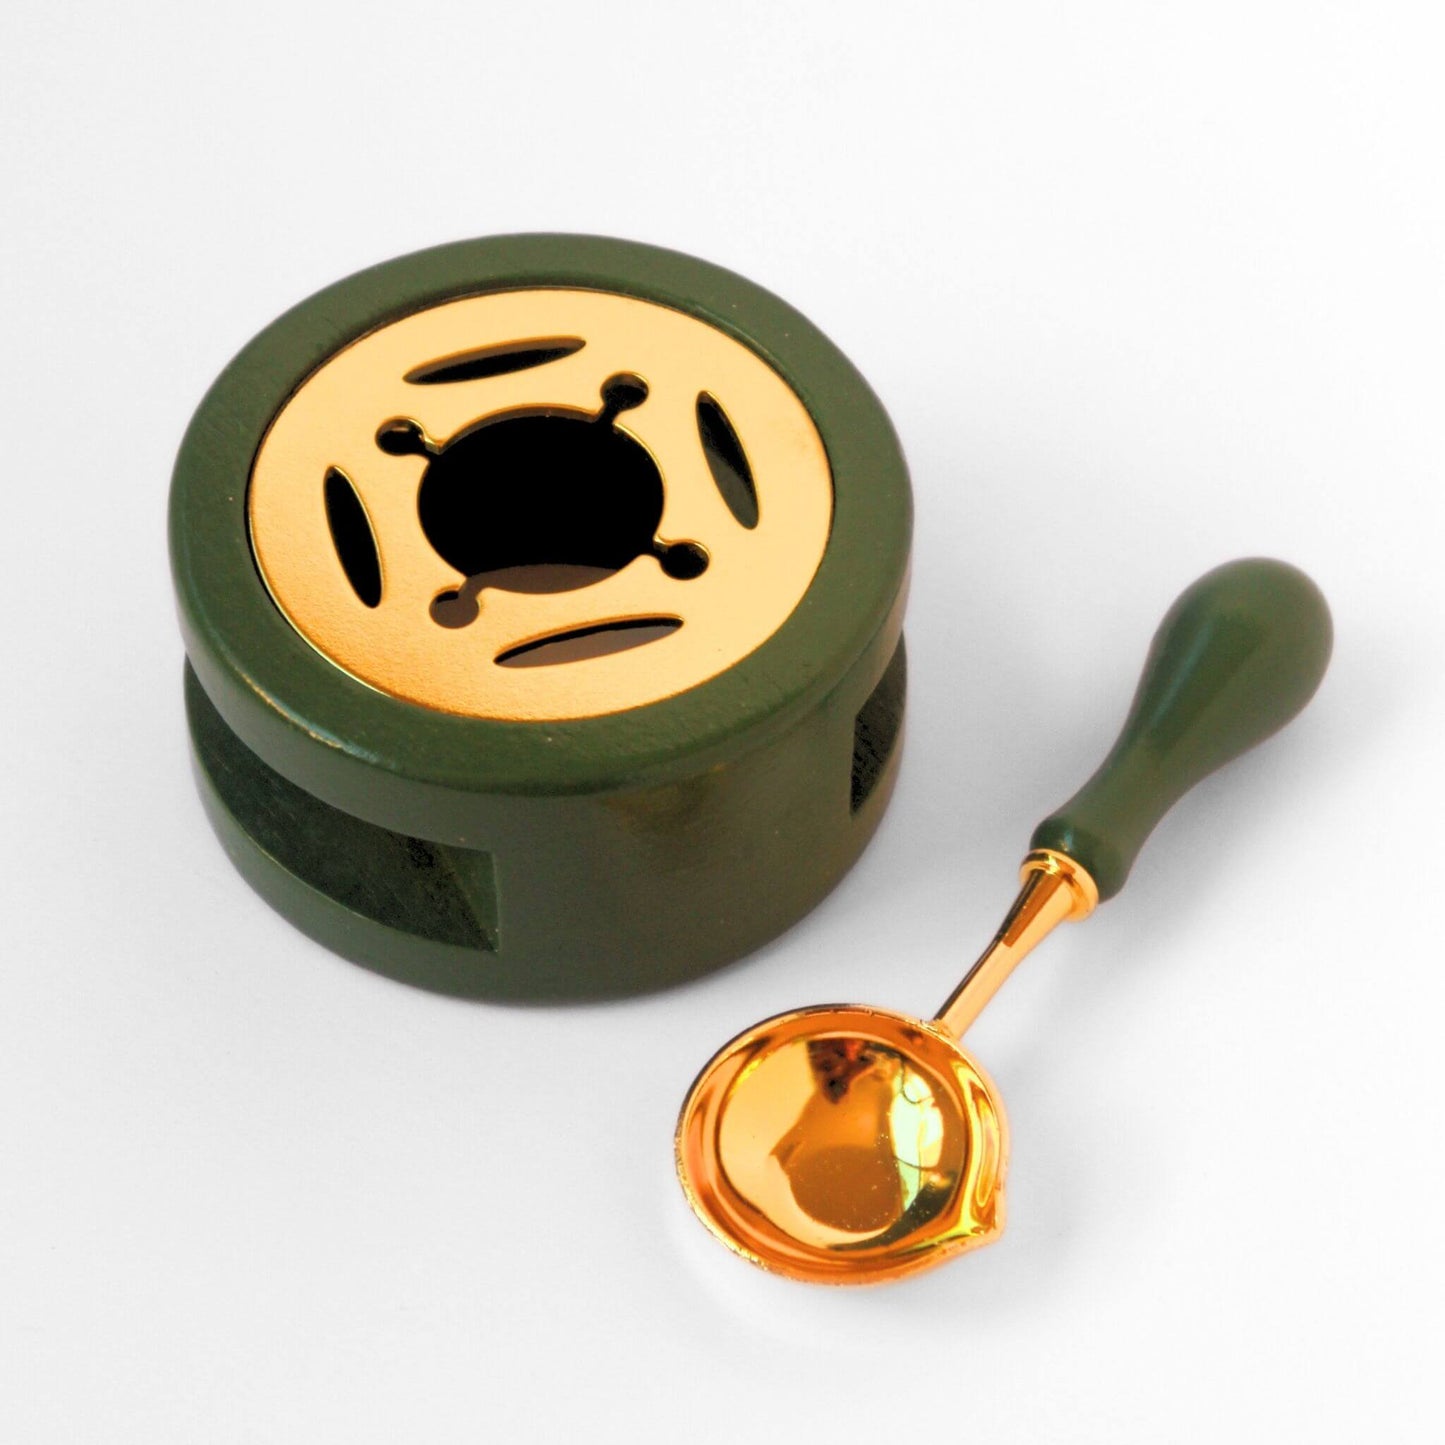 green and gold wax melting stove with matching spoon laid beside